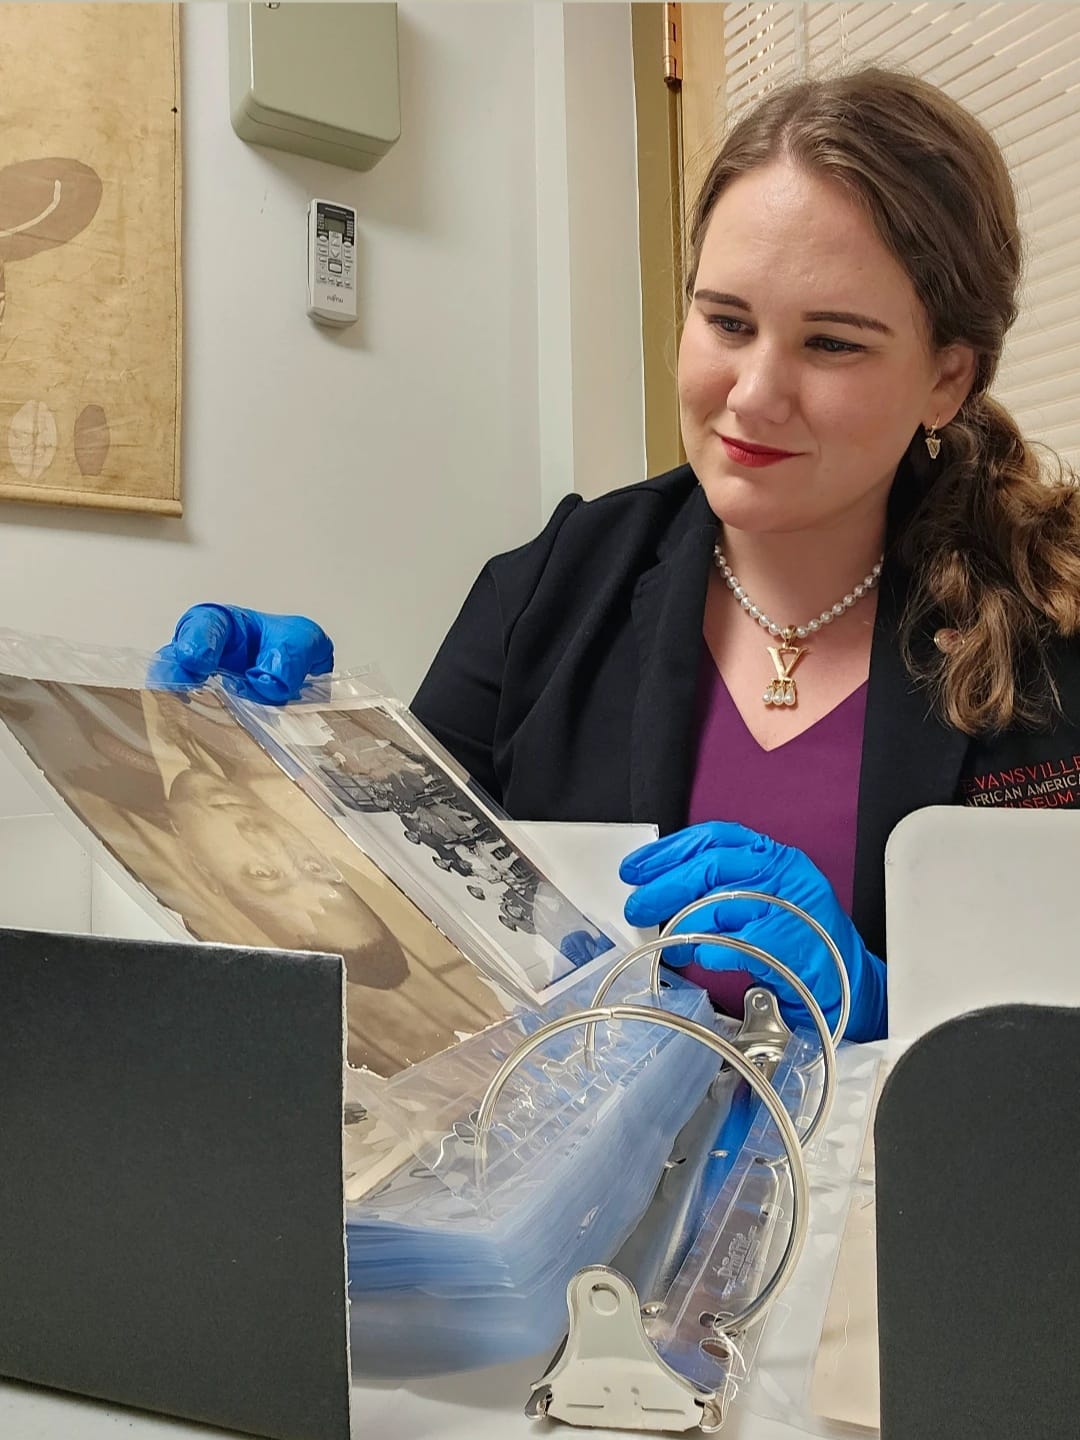 Tory Schendel-Vyvoda, Curator, wearing blue nitrile gloves and browsing through the newly rehoused photographs. Image courtesy of the Evansville African American Museum